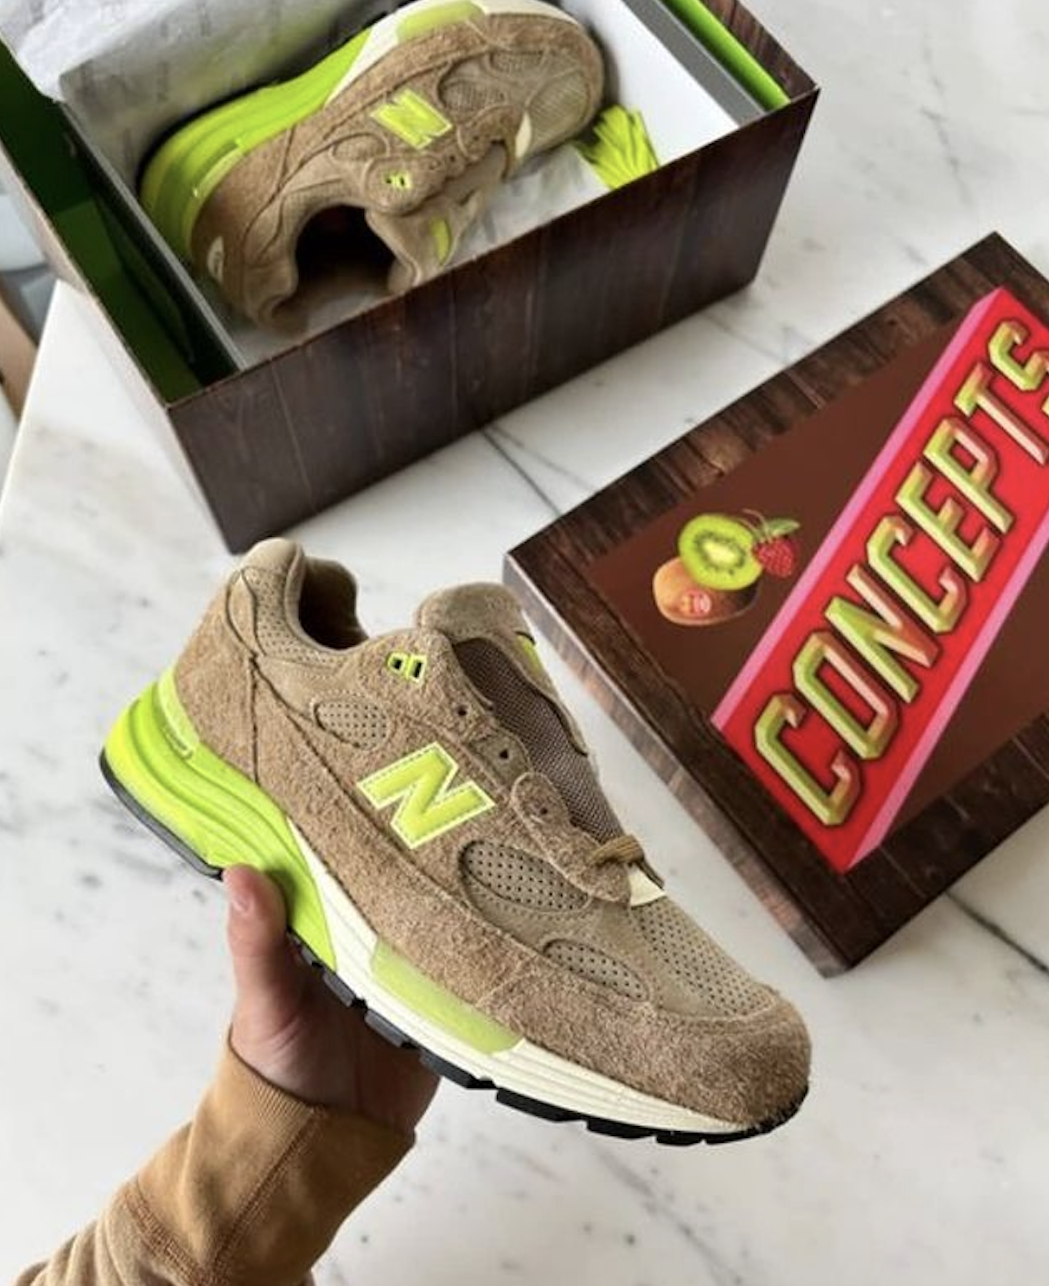 Concepts New Balance 992 Low Hanging Fruit Kiwi Strawberry Release Date